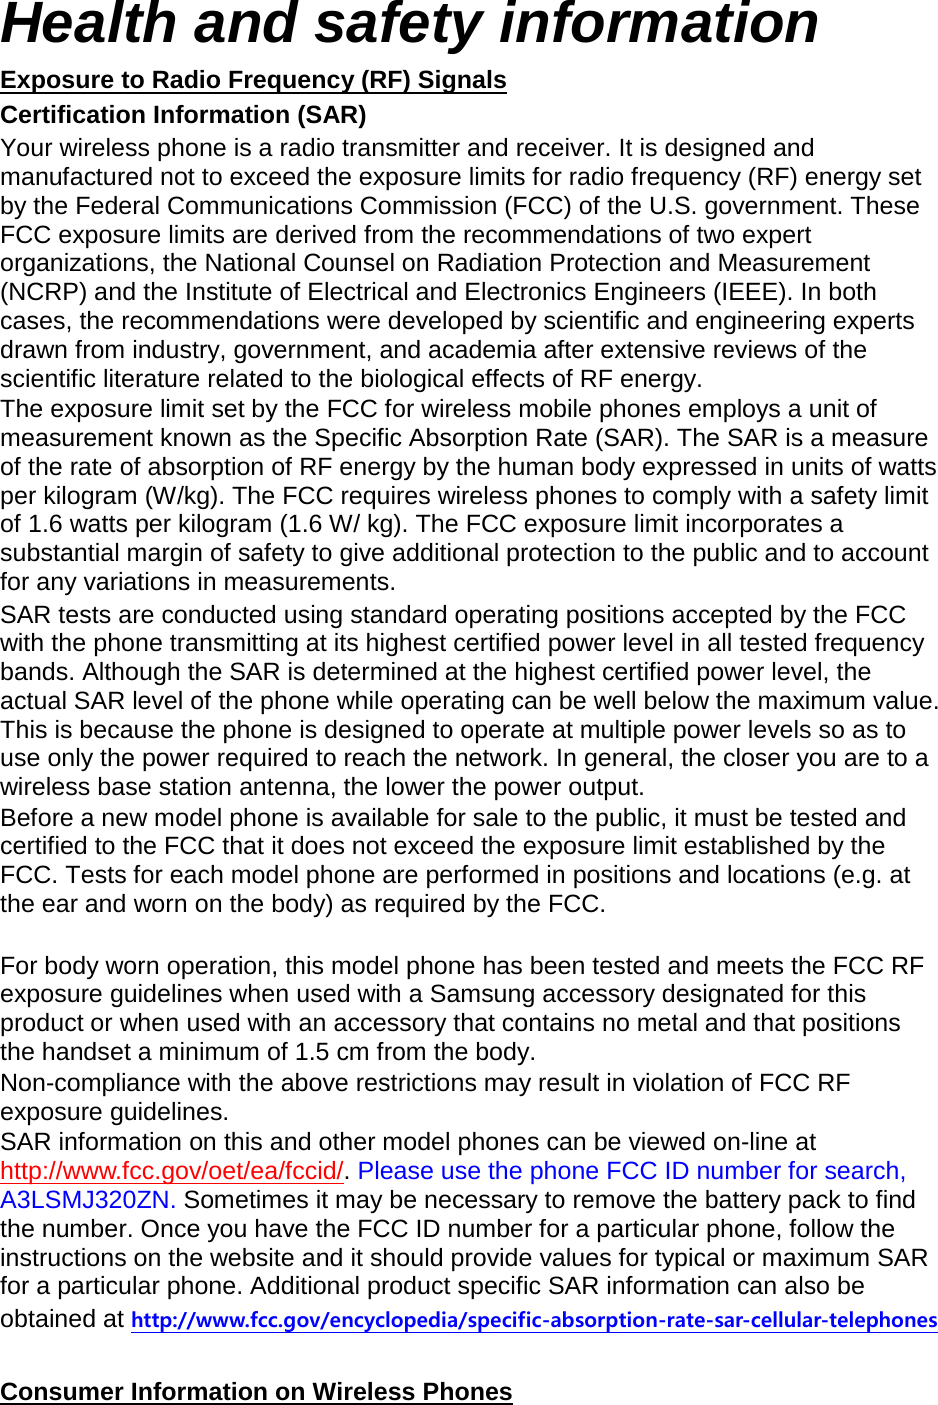 Health and safety information Exposure to Radio Frequency (RF) Signals Certification Information (SAR) Your wireless phone is a radio transmitter and receiver. It is designed and manufactured not to exceed the exposure limits for radio frequency (RF) energy set by the Federal Communications Commission (FCC) of the U.S. government. These FCC exposure limits are derived from the recommendations of two expert organizations, the National Counsel on Radiation Protection and Measurement (NCRP) and the Institute of Electrical and Electronics Engineers (IEEE). In both cases, the recommendations were developed by scientific and engineering experts drawn from industry, government, and academia after extensive reviews of the scientific literature related to the biological effects of RF energy. The exposure limit set by the FCC for wireless mobile phones employs a unit of measurement known as the Specific Absorption Rate (SAR). The SAR is a measure of the rate of absorption of RF energy by the human body expressed in units of watts per kilogram (W/kg). The FCC requires wireless phones to comply with a safety limit of 1.6 watts per kilogram (1.6 W/ kg). The FCC exposure limit incorporates a substantial margin of safety to give additional protection to the public and to account for any variations in measurements. SAR tests are conducted using standard operating positions accepted by the FCC with the phone transmitting at its highest certified power level in all tested frequency bands. Although the SAR is determined at the highest certified power level, the actual SAR level of the phone while operating can be well below the maximum value. This is because the phone is designed to operate at multiple power levels so as to use only the power required to reach the network. In general, the closer you are to a wireless base station antenna, the lower the power output. Before a new model phone is available for sale to the public, it must be tested and certified to the FCC that it does not exceed the exposure limit established by the FCC. Tests for each model phone are performed in positions and locations (e.g. at the ear and worn on the body) as required by the FCC.      For body worn operation, this model phone has been tested and meets the FCC RF exposure guidelines when used with a Samsung accessory designated for this product or when used with an accessory that contains no metal and that positions the handset a minimum of 1.5 cm from the body.   Non-compliance with the above restrictions may result in violation of FCC RF exposure guidelines. SAR information on this and other model phones can be viewed on-line at http://www.fcc.gov/oet/ea/fccid/. Please use the phone FCC ID number for search, A3LSMJ320ZN. Sometimes it may be necessary to remove the battery pack to find the number. Once you have the FCC ID number for a particular phone, follow the instructions on the website and it should provide values for typical or maximum SAR for a particular phone. Additional product specific SAR information can also be obtained at http://www.fcc.gov/encyclopedia/specific-absorption-rate-sar-cellular-telephones  Consumer Information on Wireless Phones 